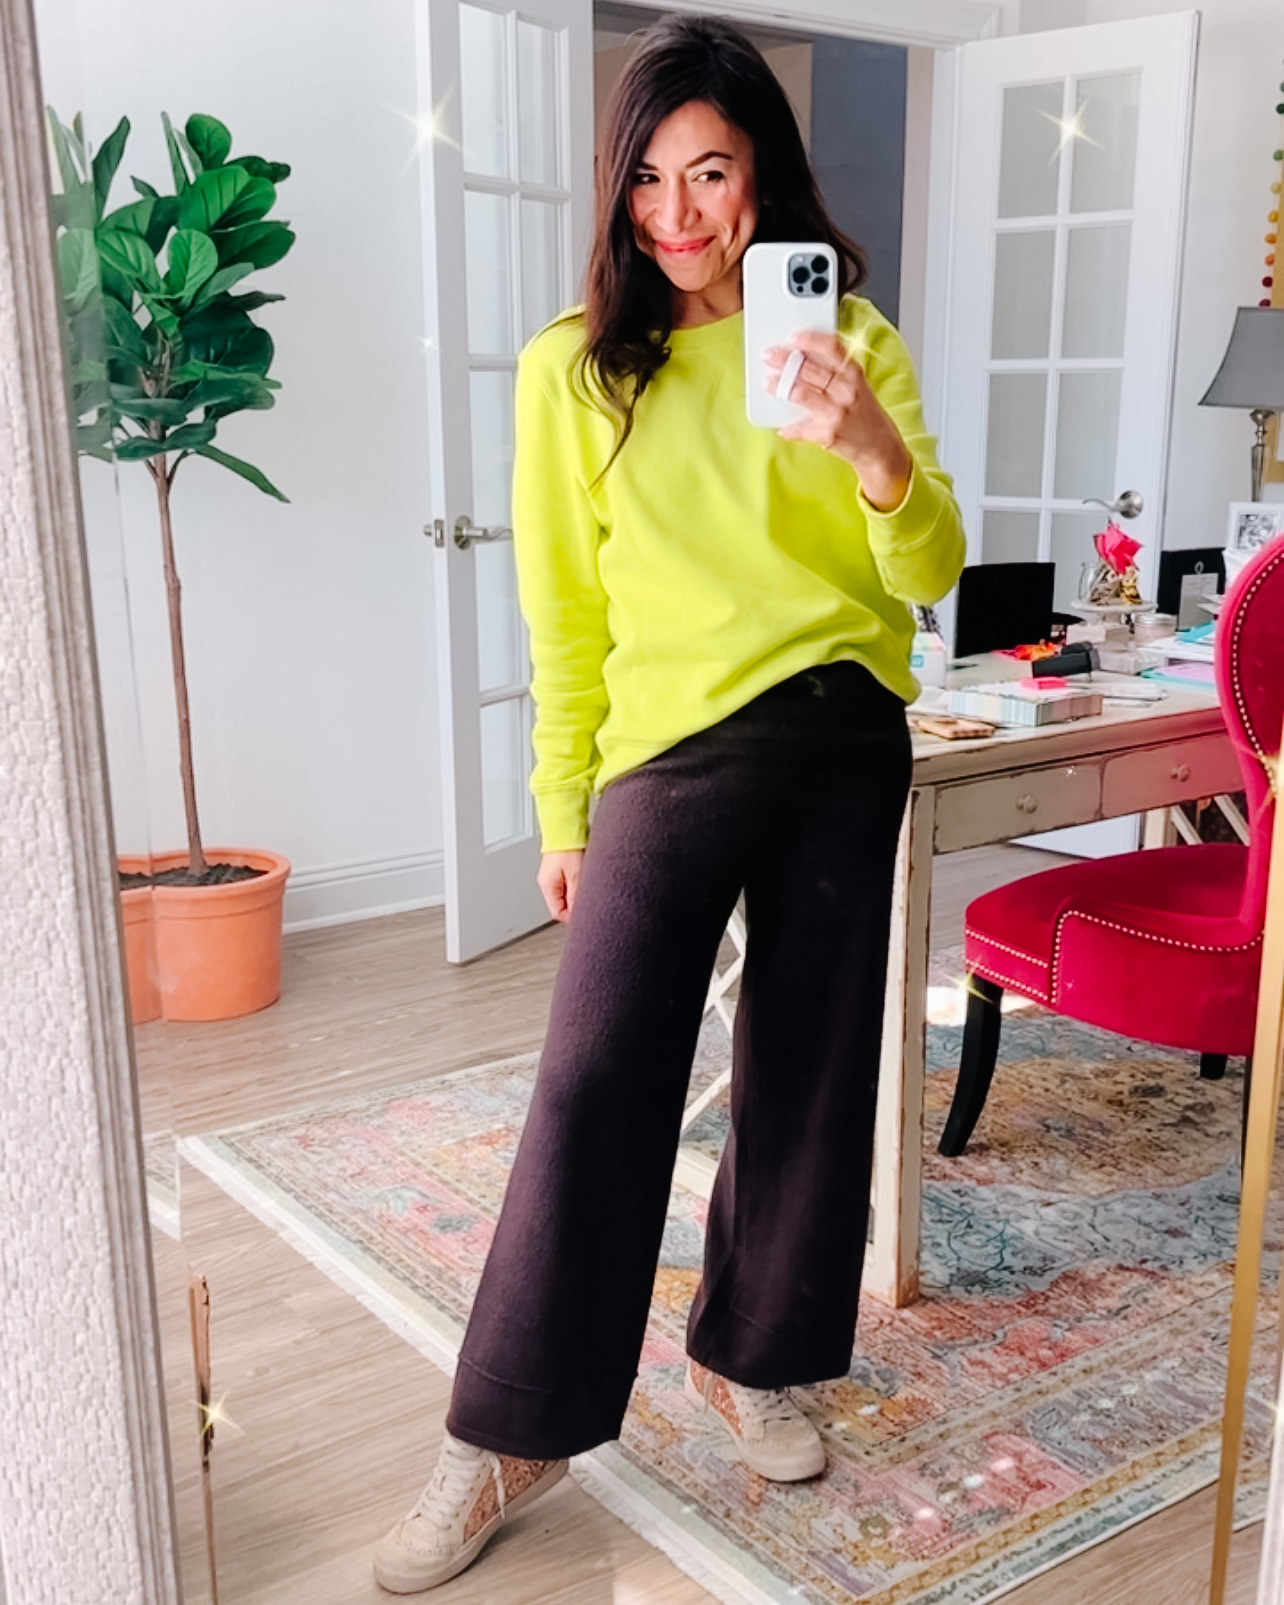 How to style a sweatshirt and make it look chic. Neon sweatshirt outfit.